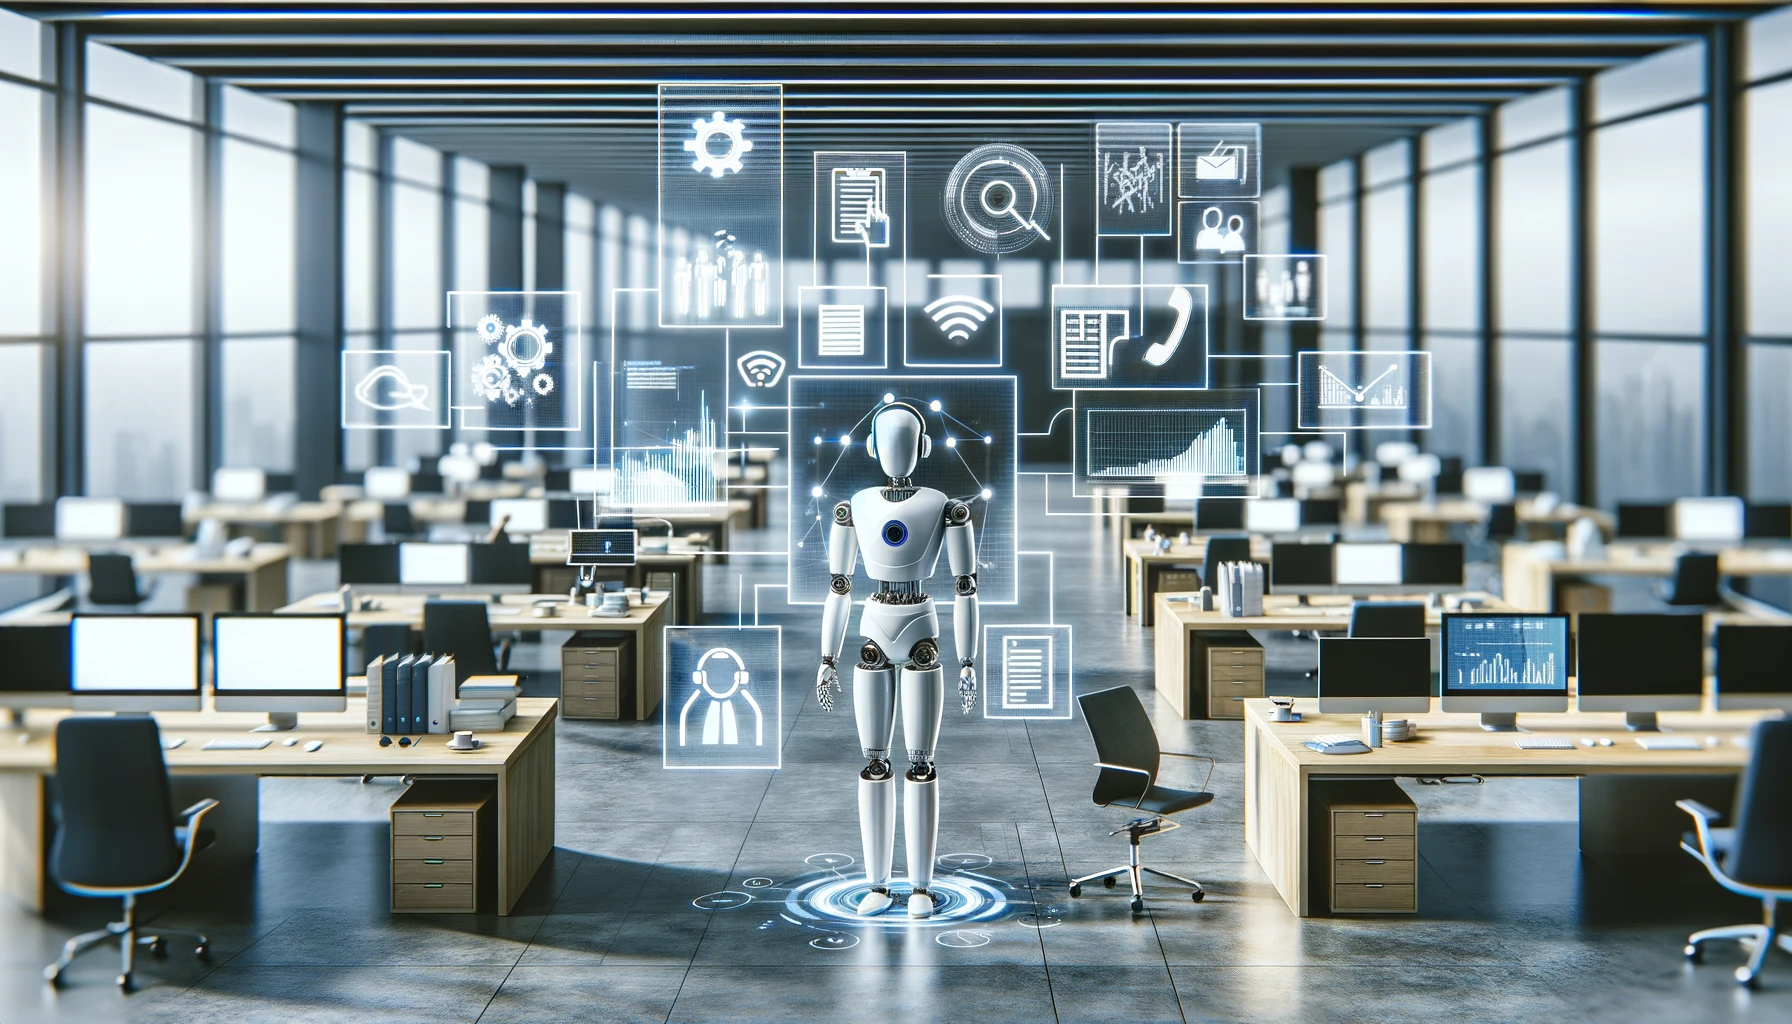 A wide image depicting Business Process Automation through a central AI or robot figure multitasking in a minimalist office, surrounded by Efficiency Tools like digital screens and documents, symbolizing streamlined operations and productivity.